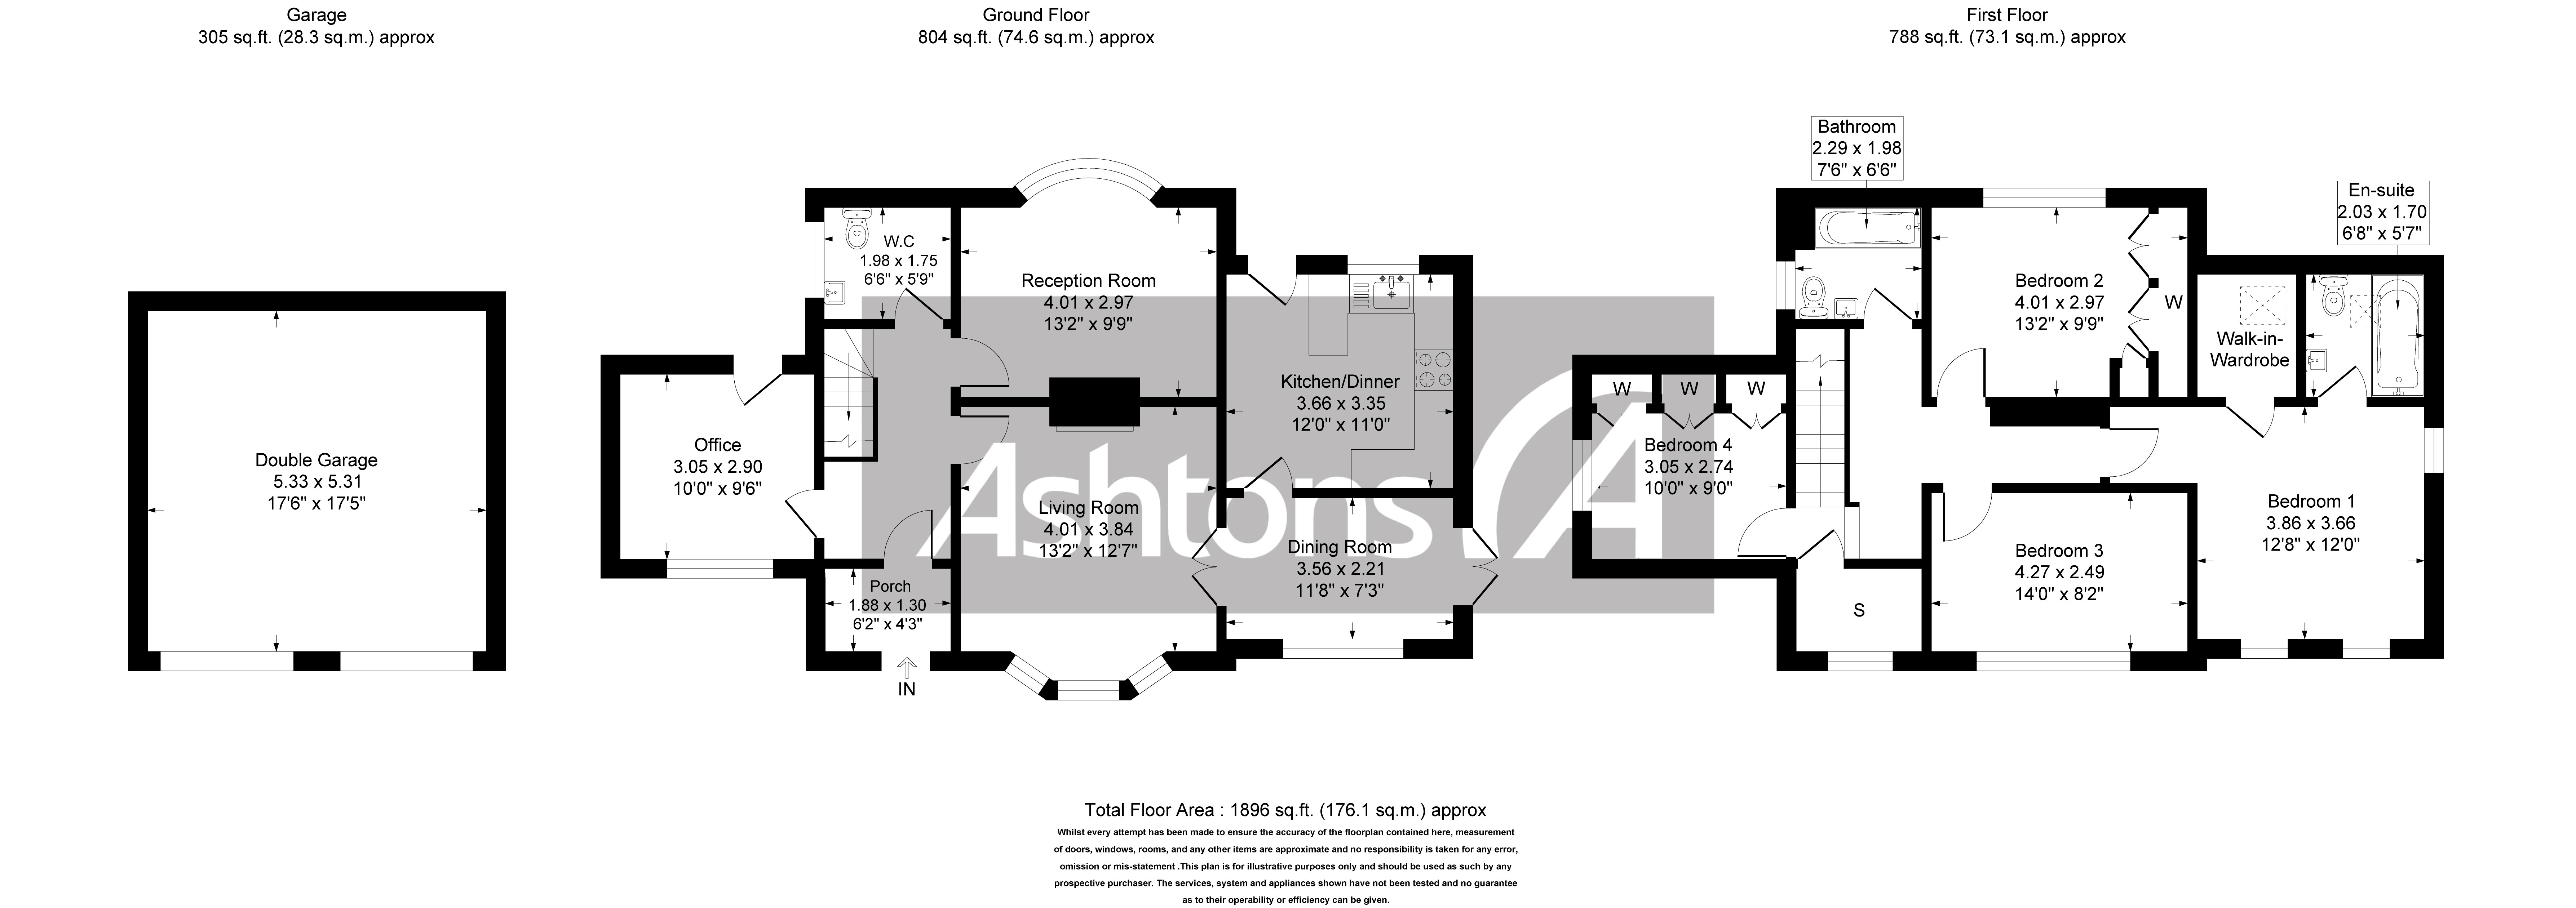 South Lodge St. Helens Road, Leigh Floor Plan